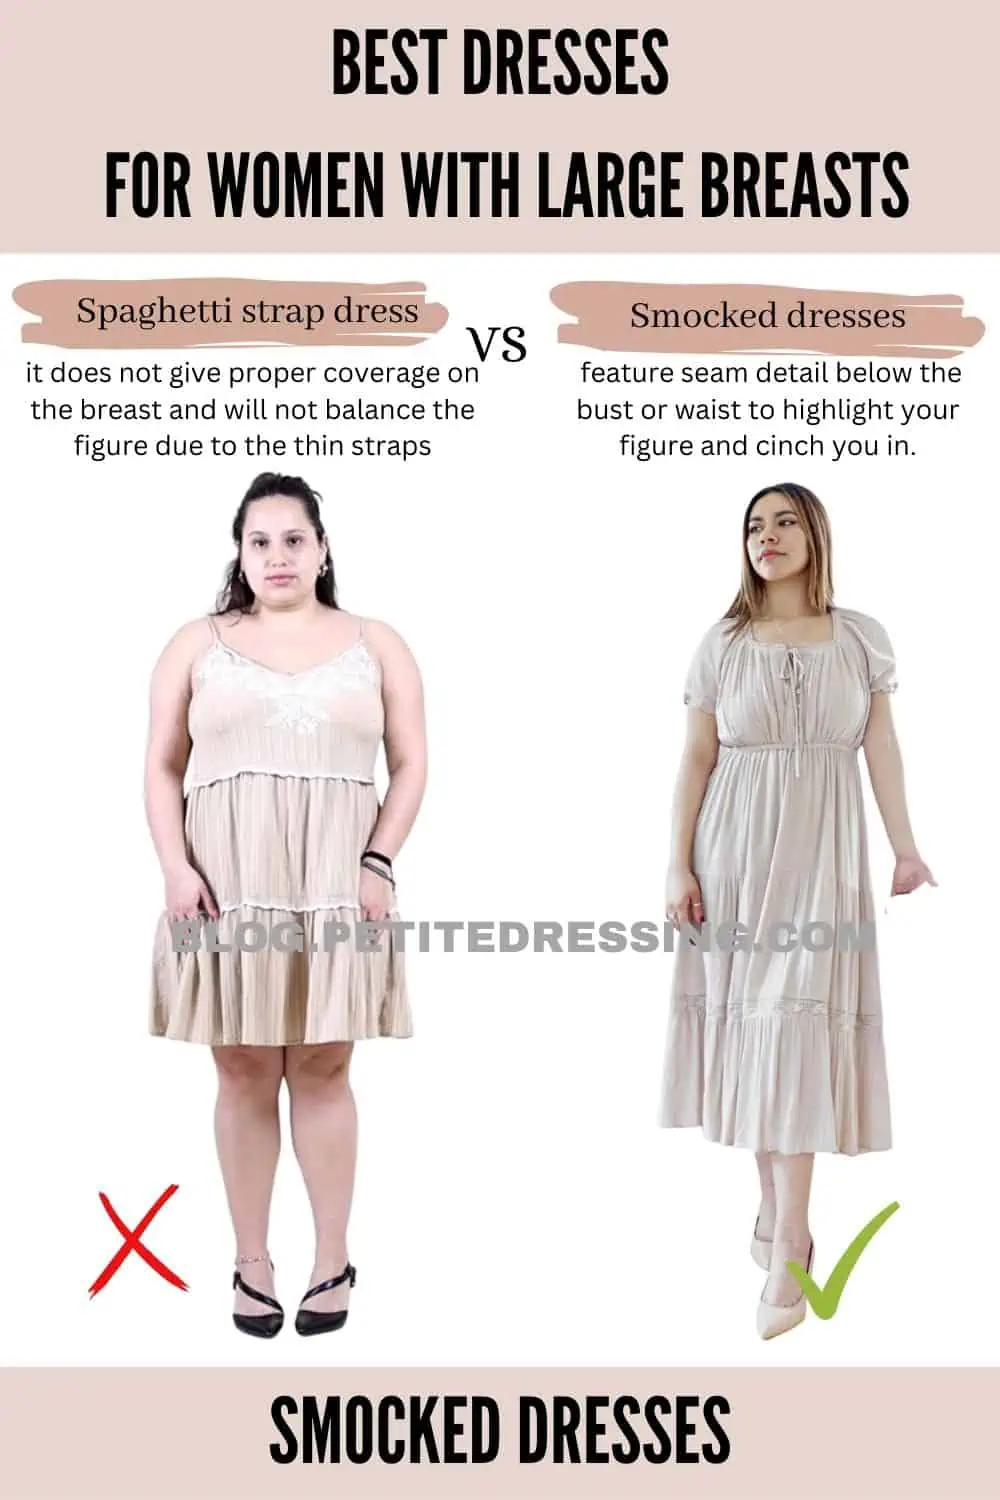 The Complete Dress Guide for Women with Large Breasts - Petite